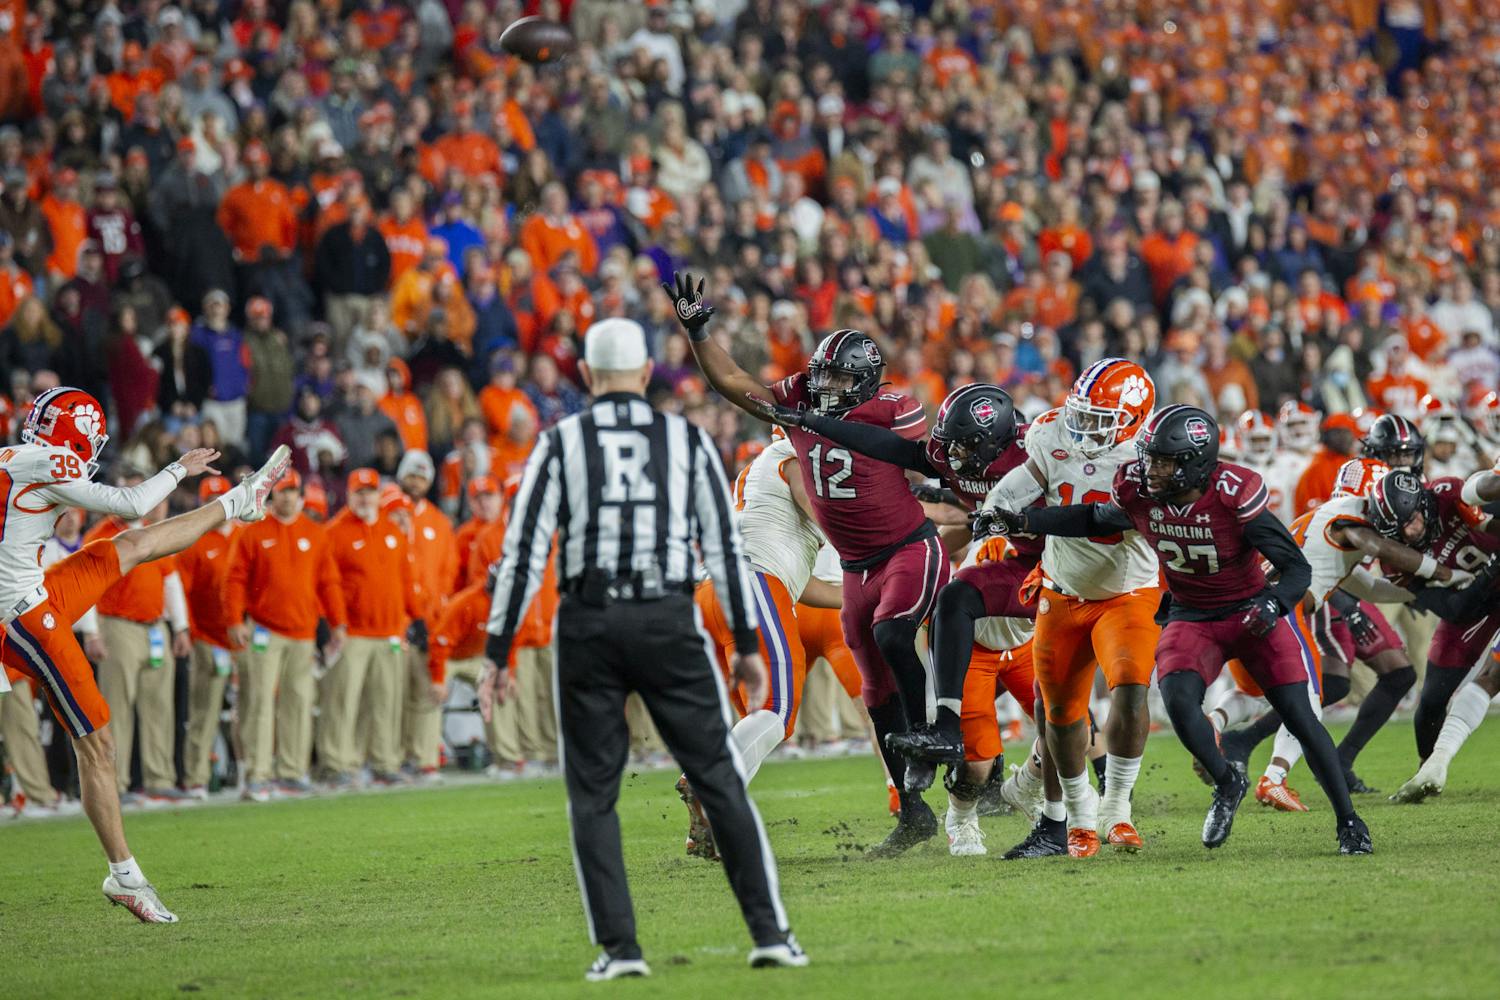 The Gamecock offensive line, consisting of redshirt sophomore edge Jatius Geer and redshirt junior defensive back King-Demenian Ford, attempt to block a punt in the second quarter of the 120th Palmetto Bowl on Nov. 25, 2023. The Clemson Tigers defeated the South Carolina Gamecocks 16-7.